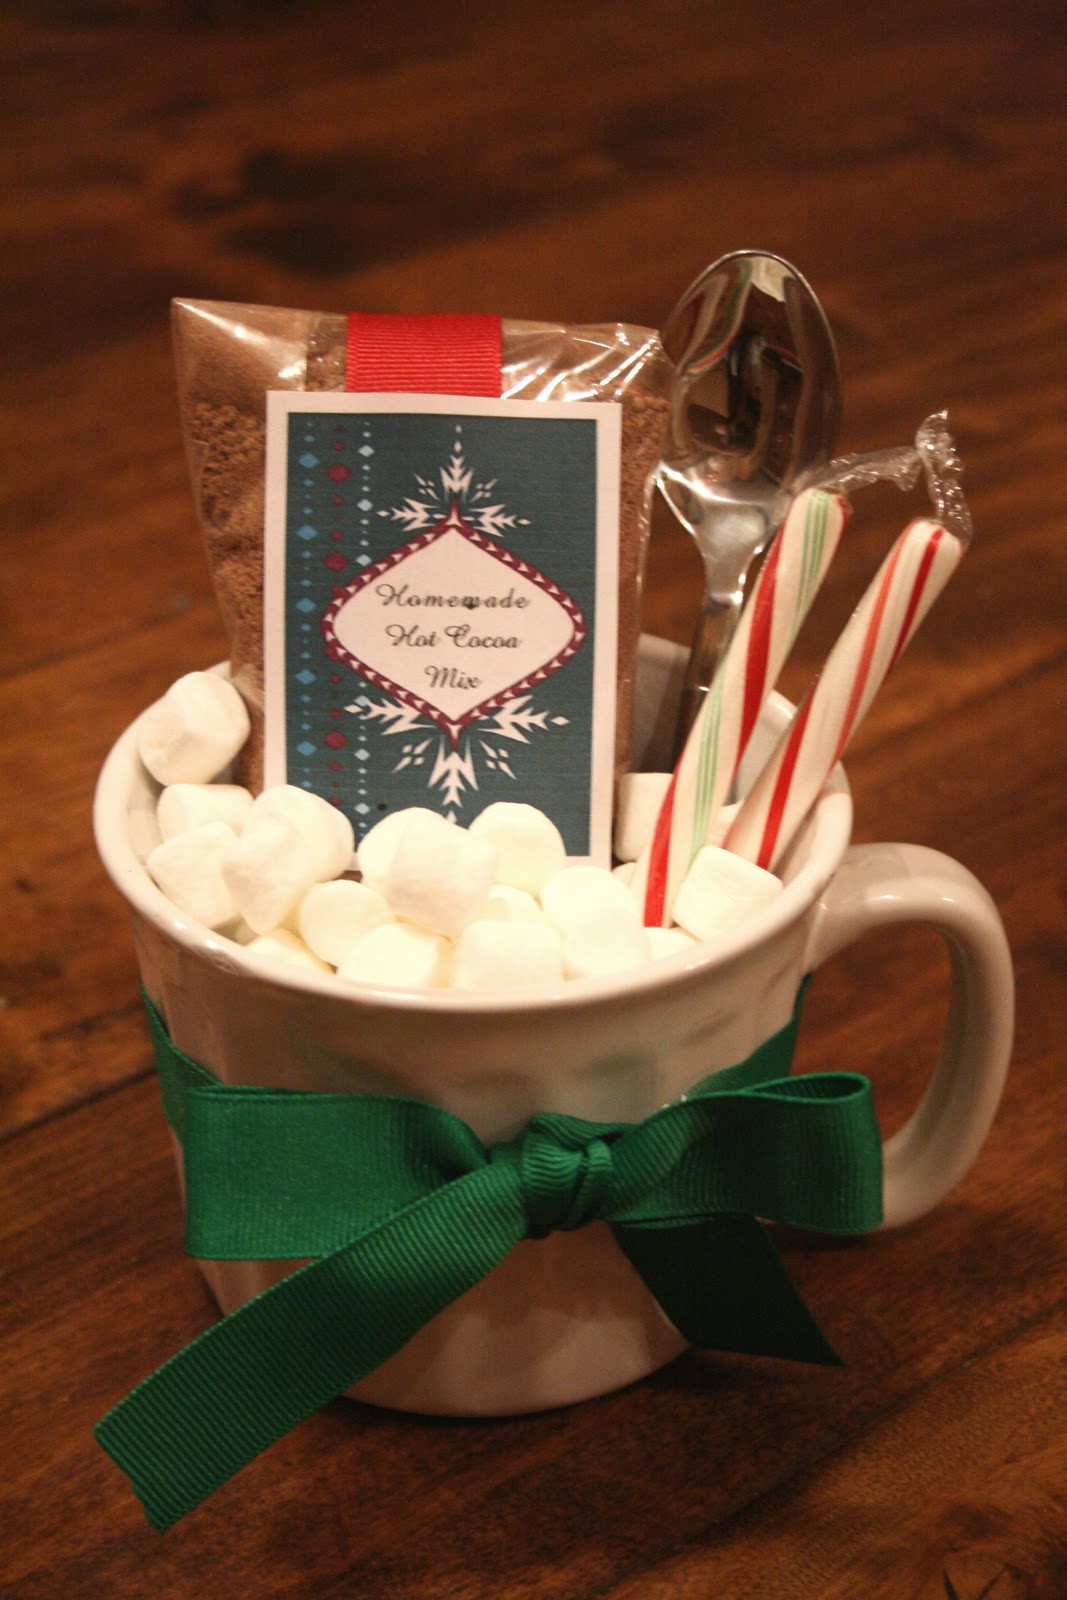 Christmas Hottest Gift
 The Nesting Corral Homemade Christmas Gifts Hot Cocoa